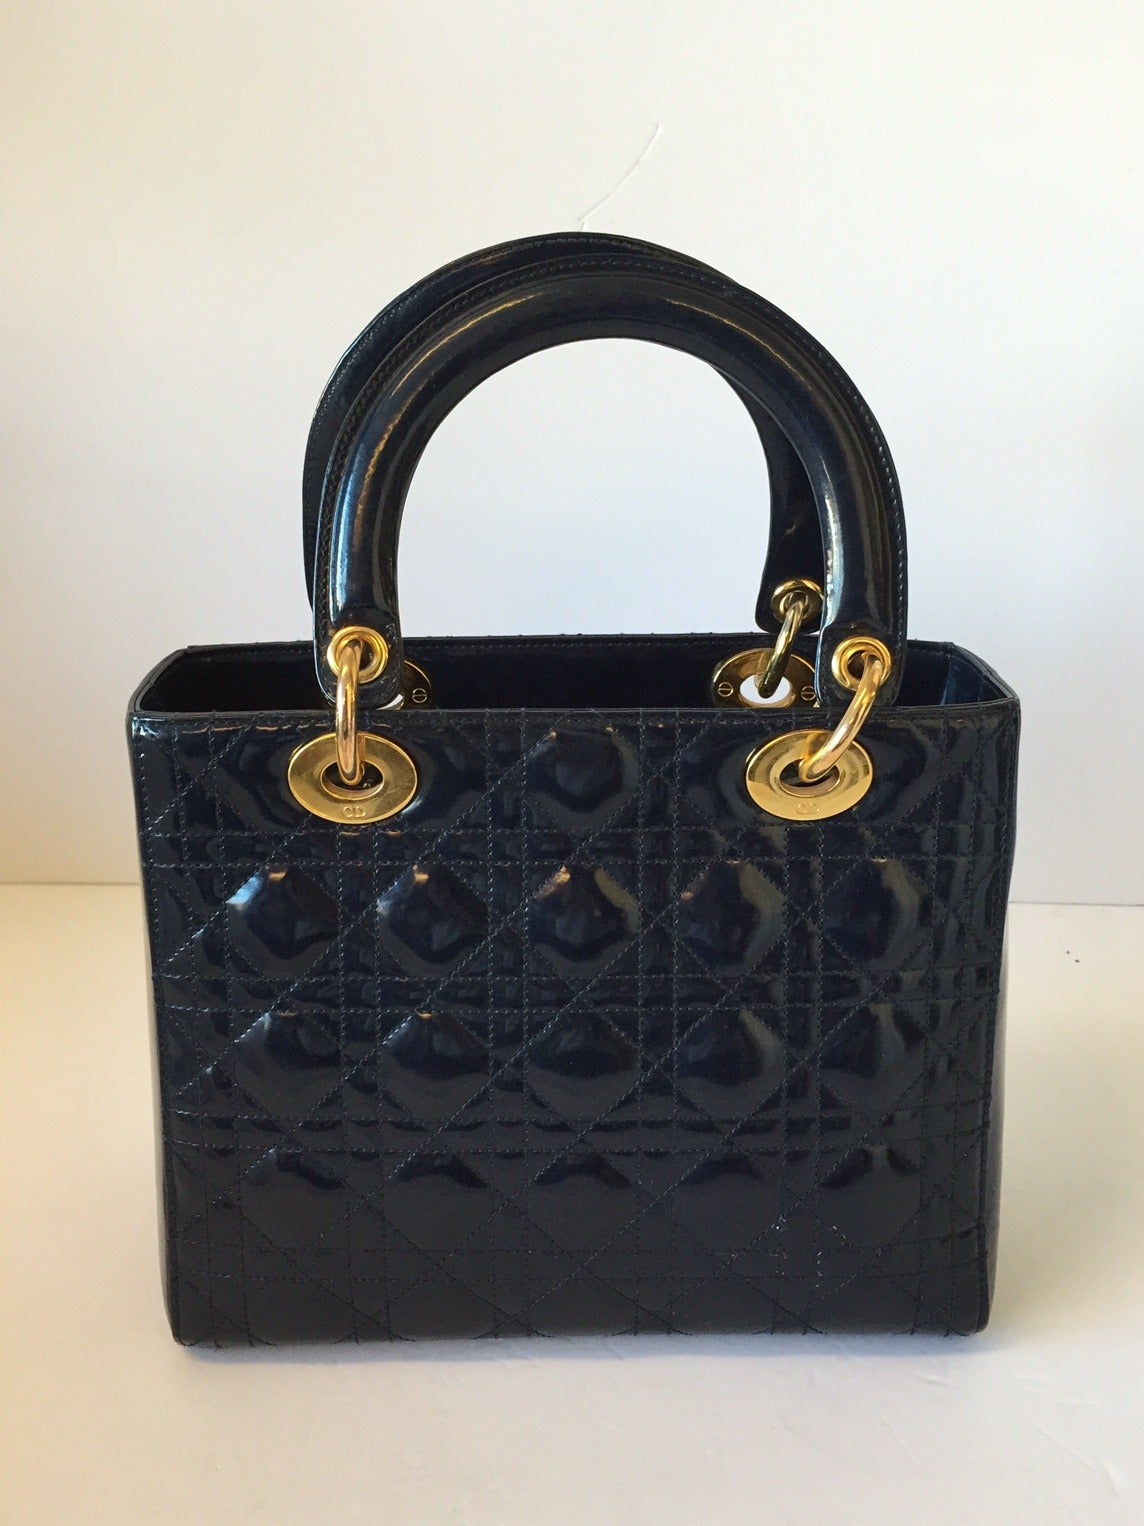 This structured bag is made of deep midnight blue patent leather with a quilted Cannage pattern embroidery. It features a dangling goldtone DIOR letter charms which adds some bling to this glamorous bag. This bag also comes with a removable shoulder